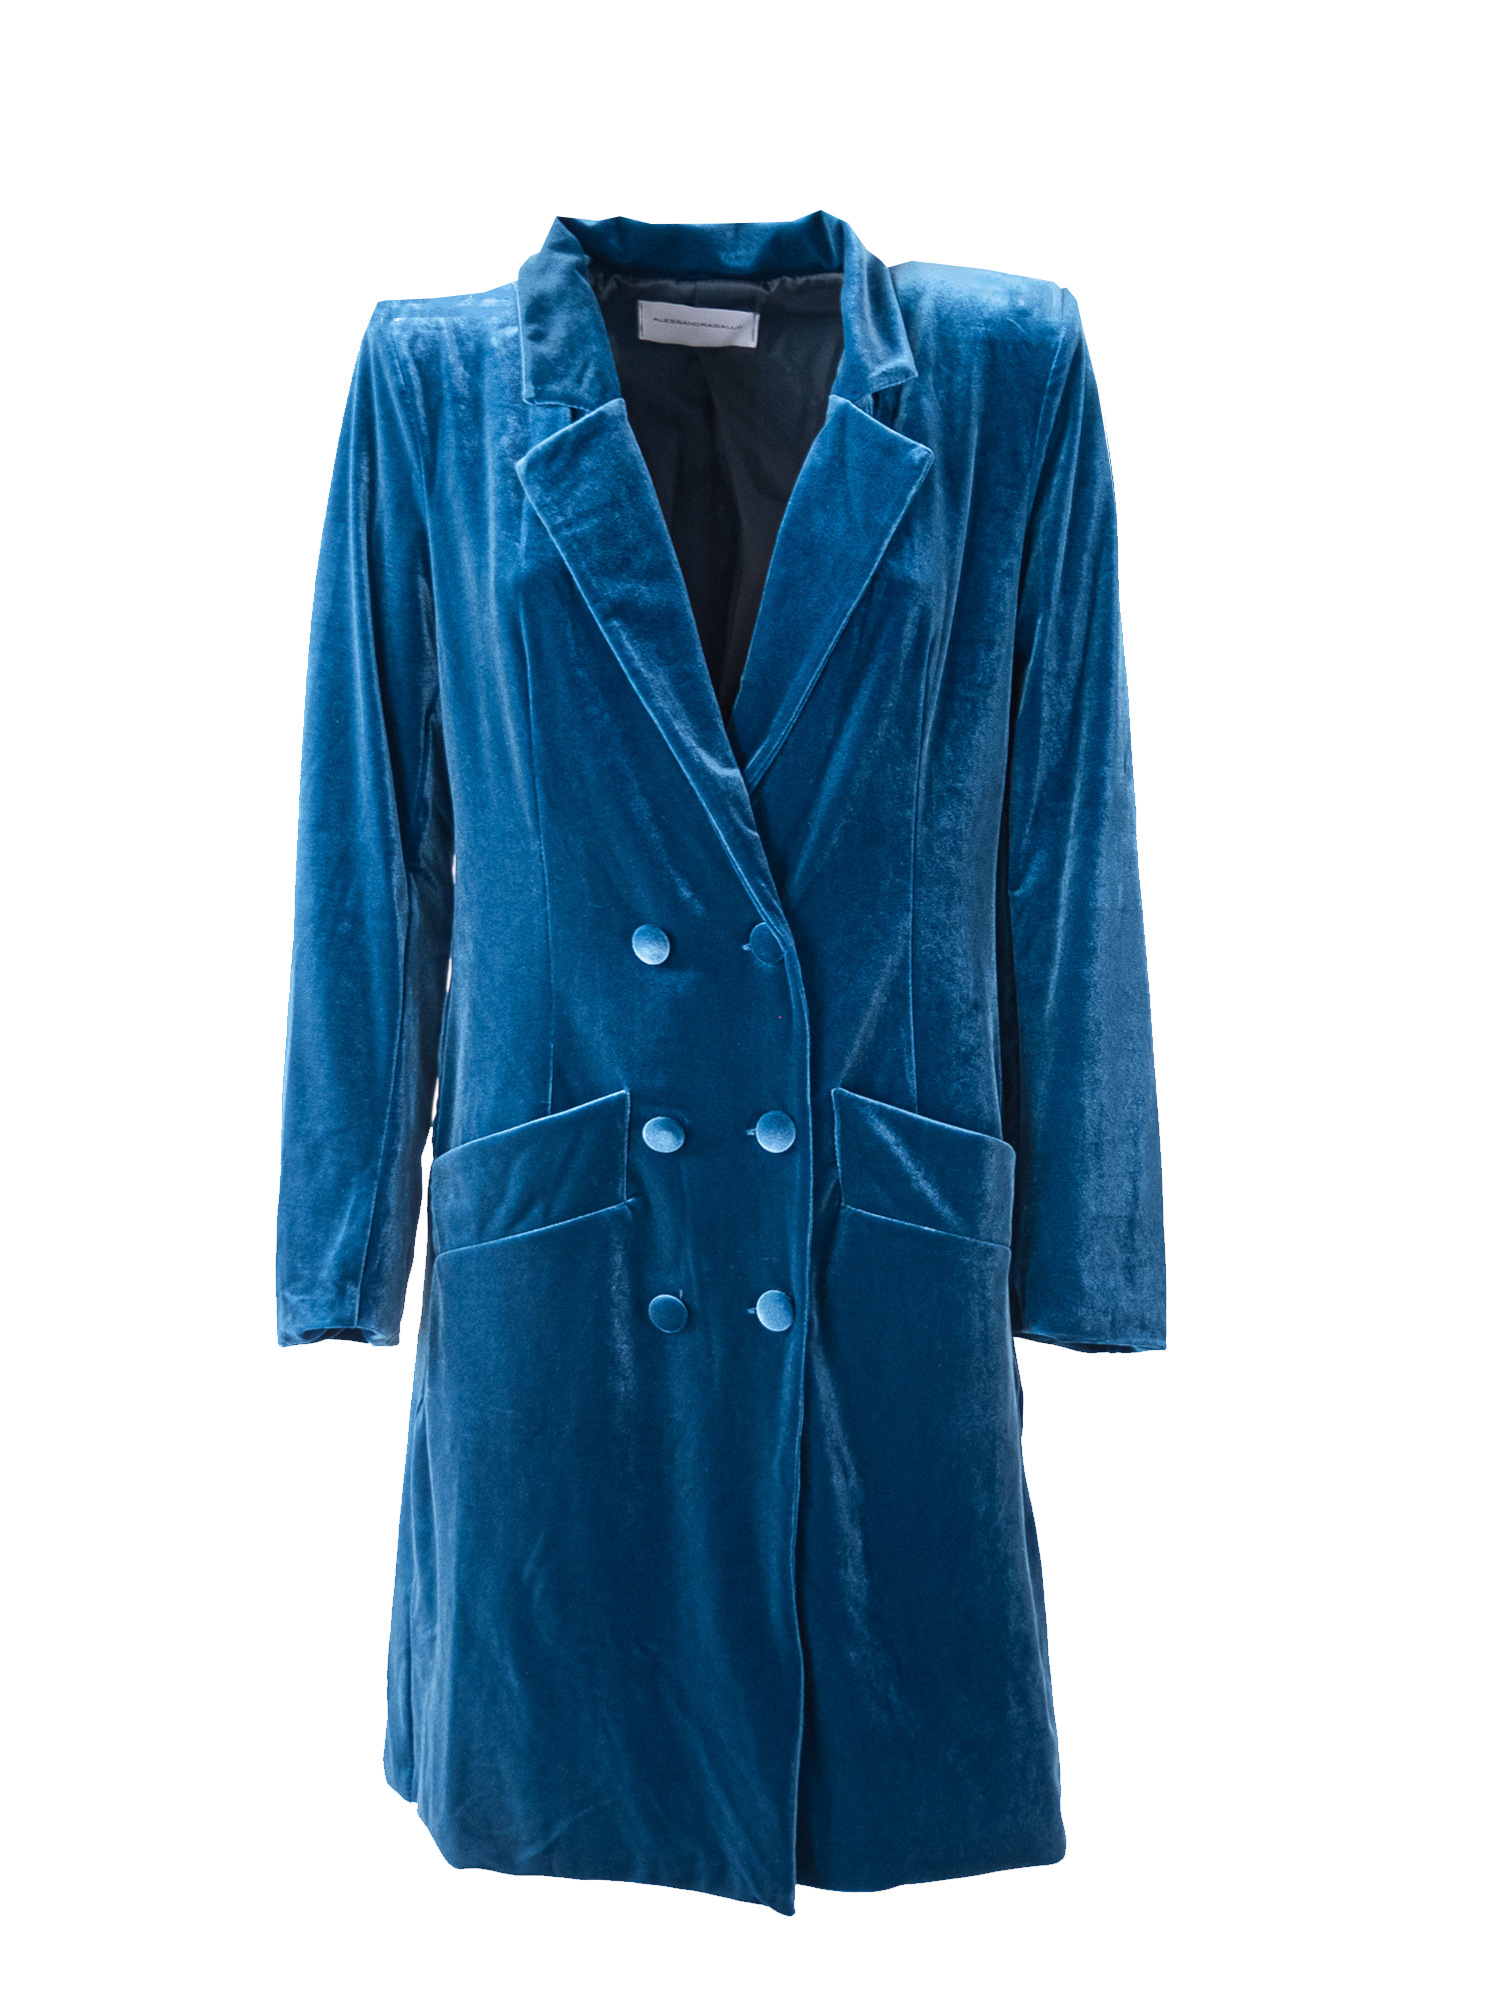 NORA - dress robe coat in teal chenille